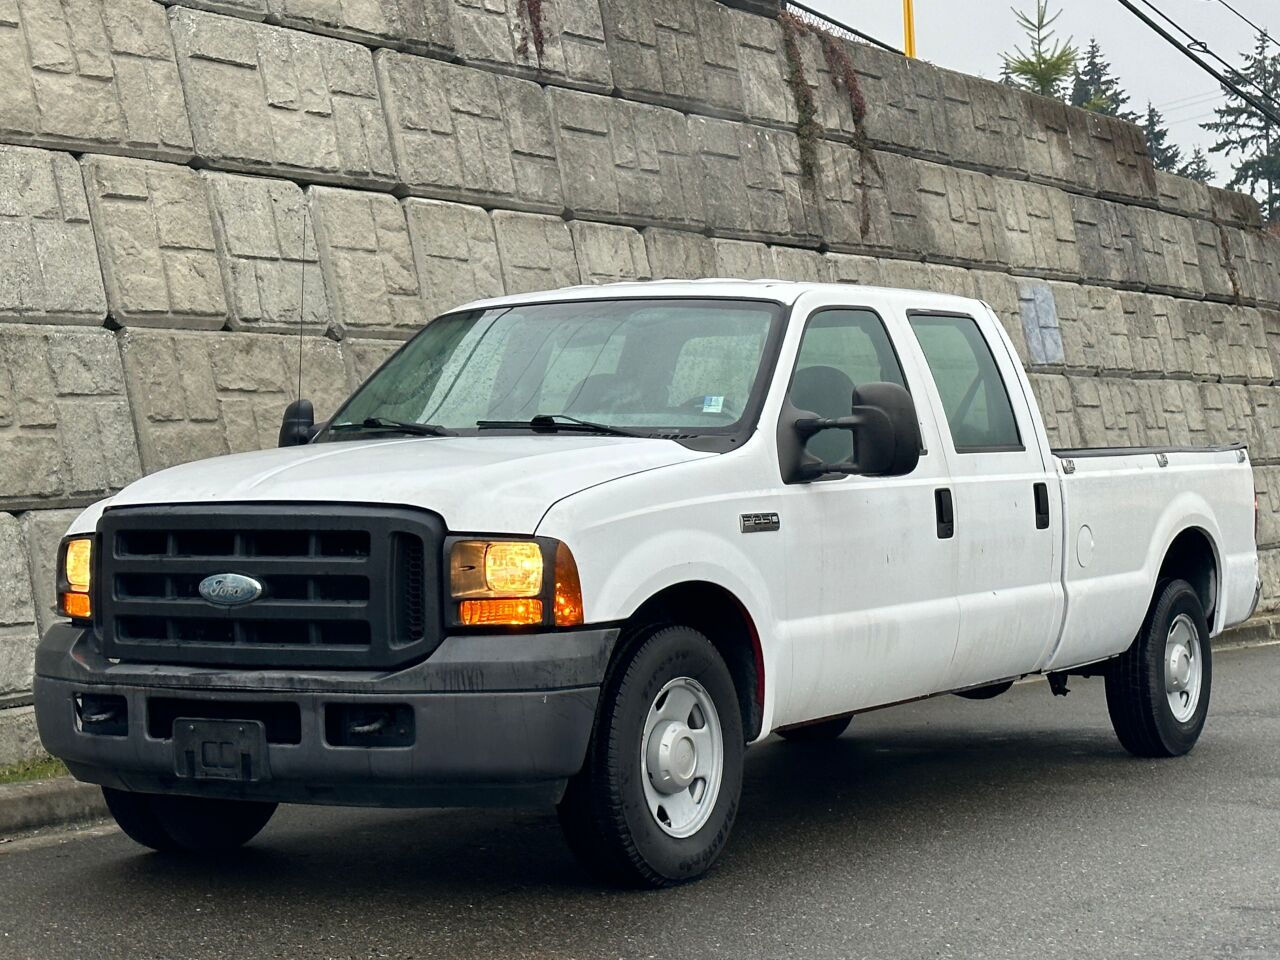 2006 Ford F-250 For Sale - Carsforsale.com®